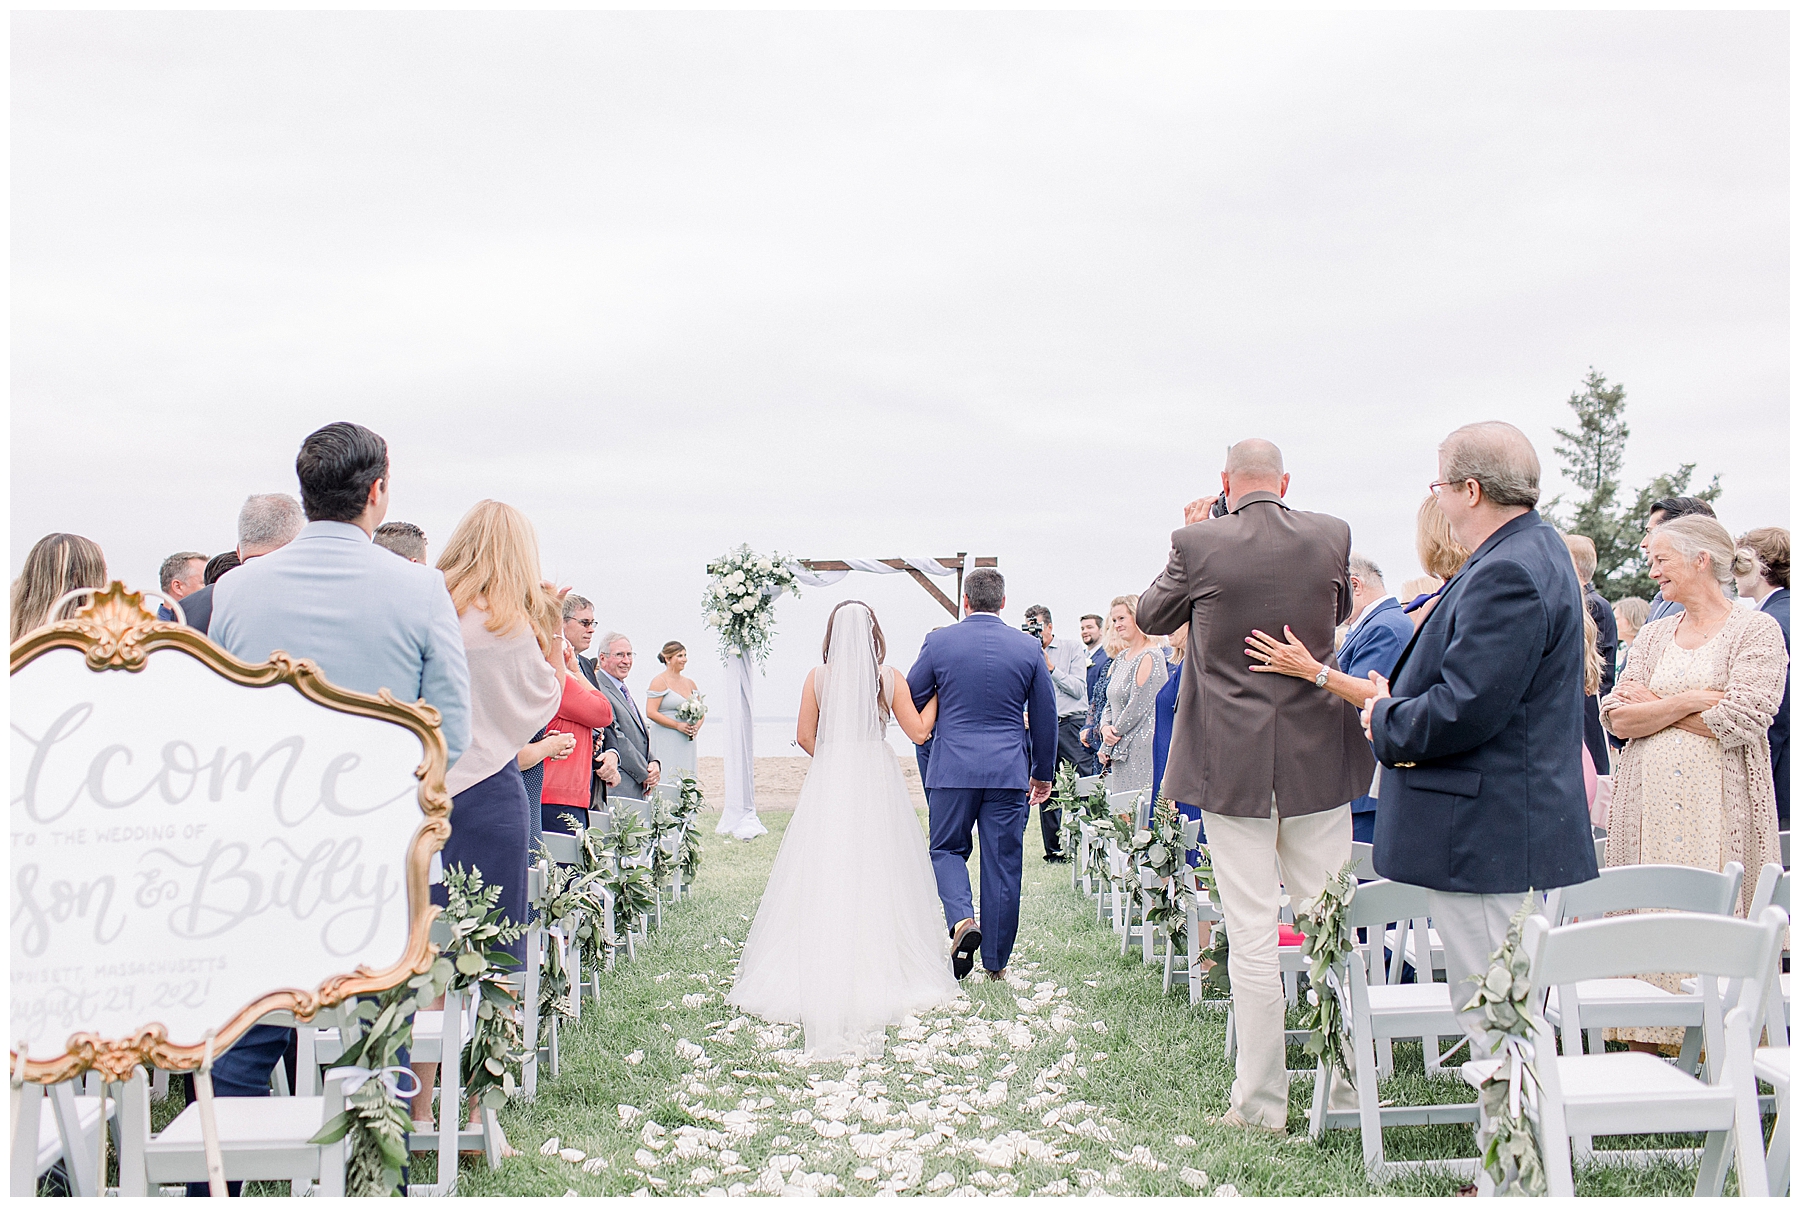 father of the bride walks daughter down the aisle at outdoor MA wedding